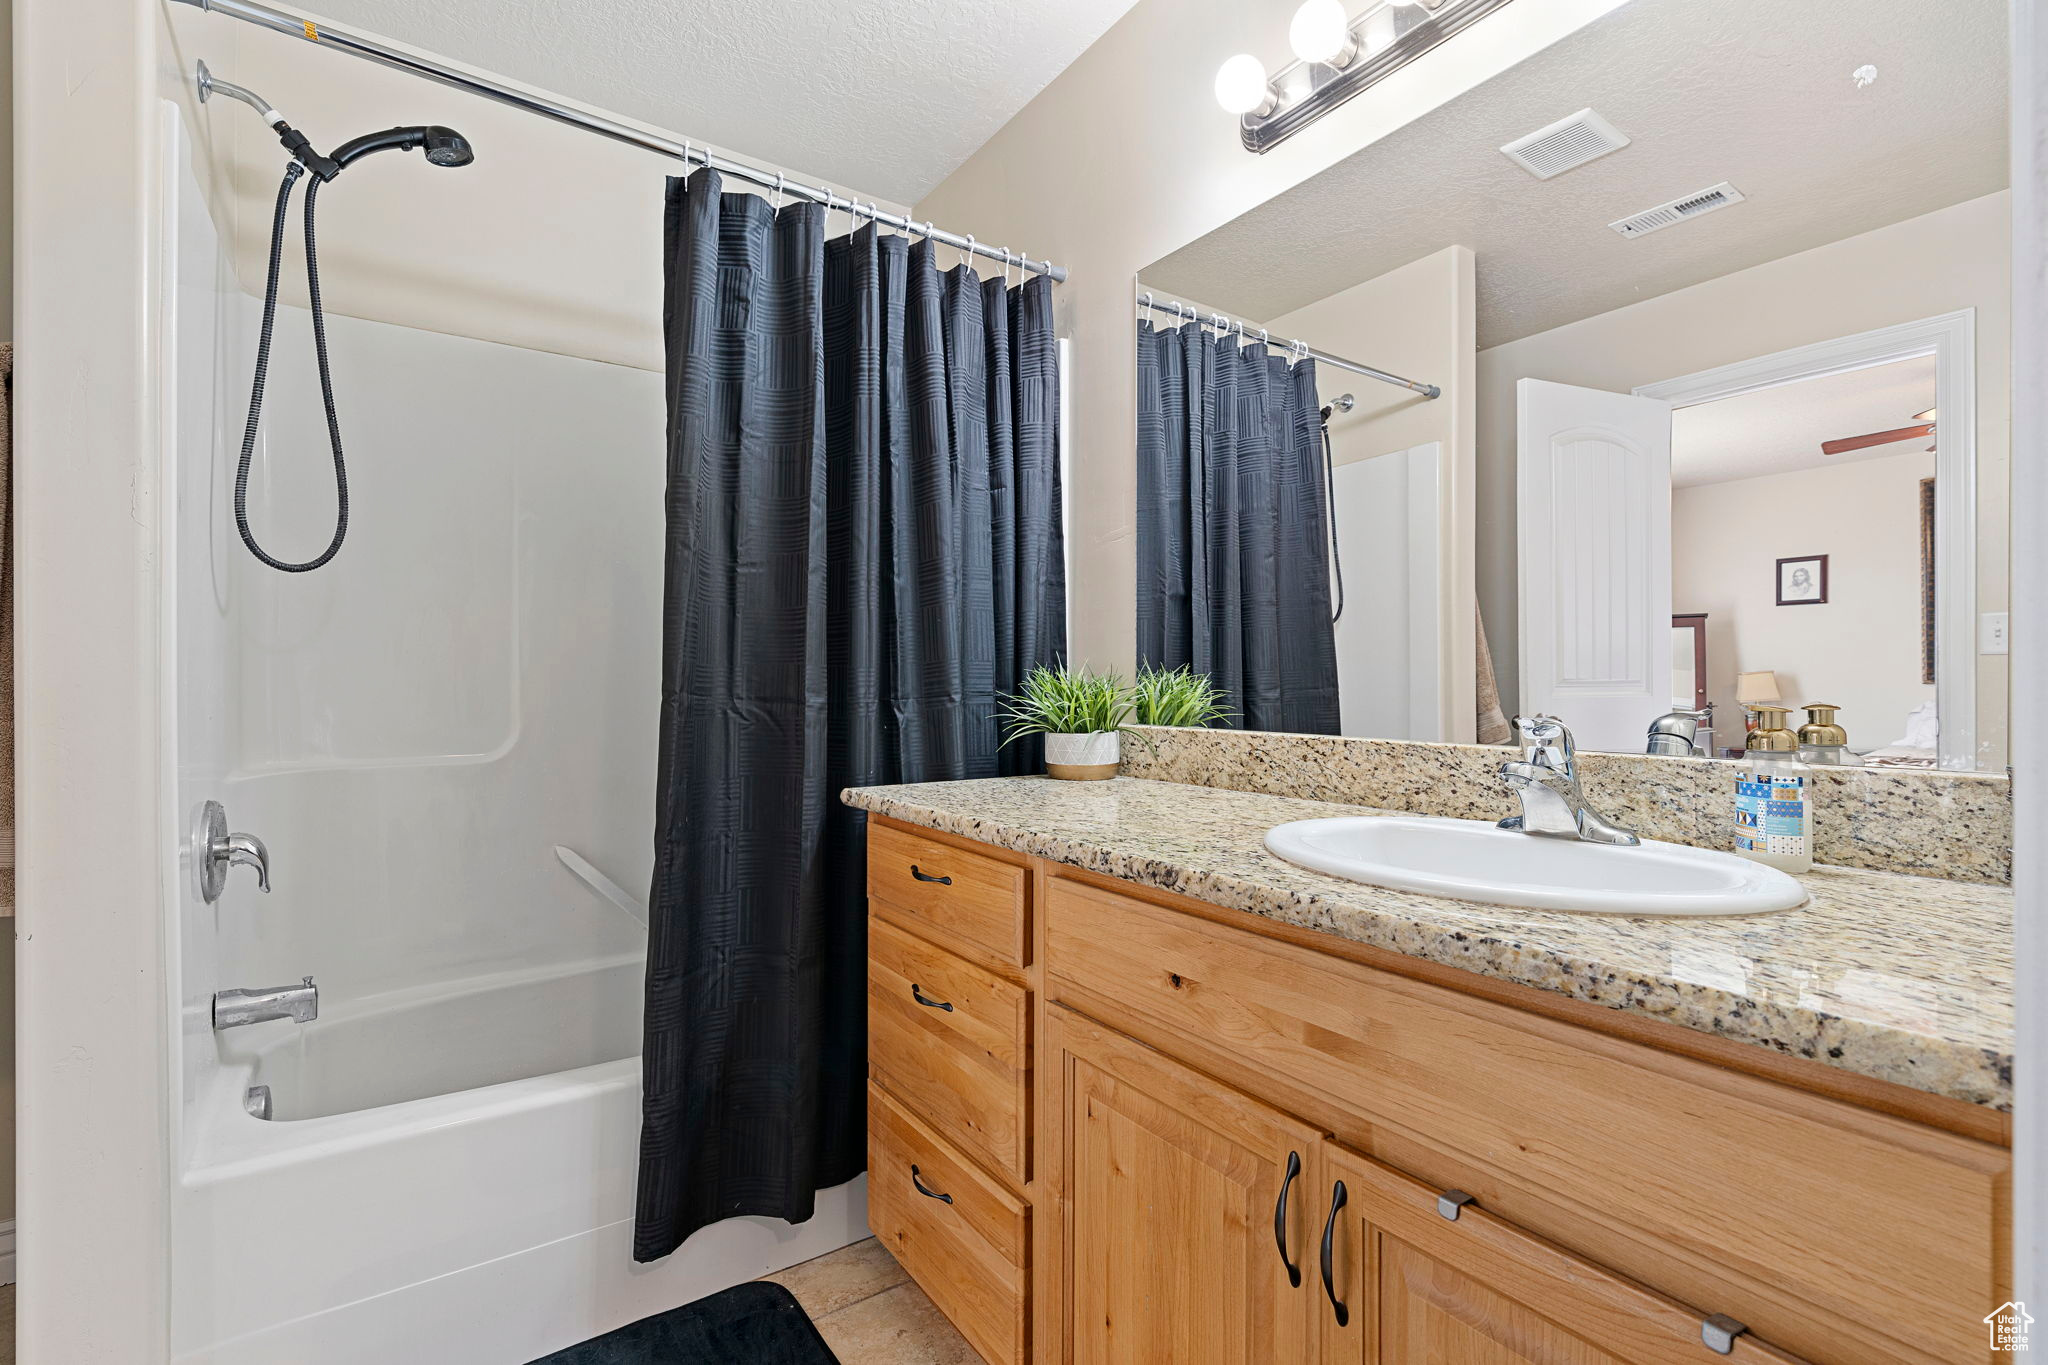 Bathroom featuring tile floors, large vanity, a textured ceiling, and shower / bathtub combination with curtain